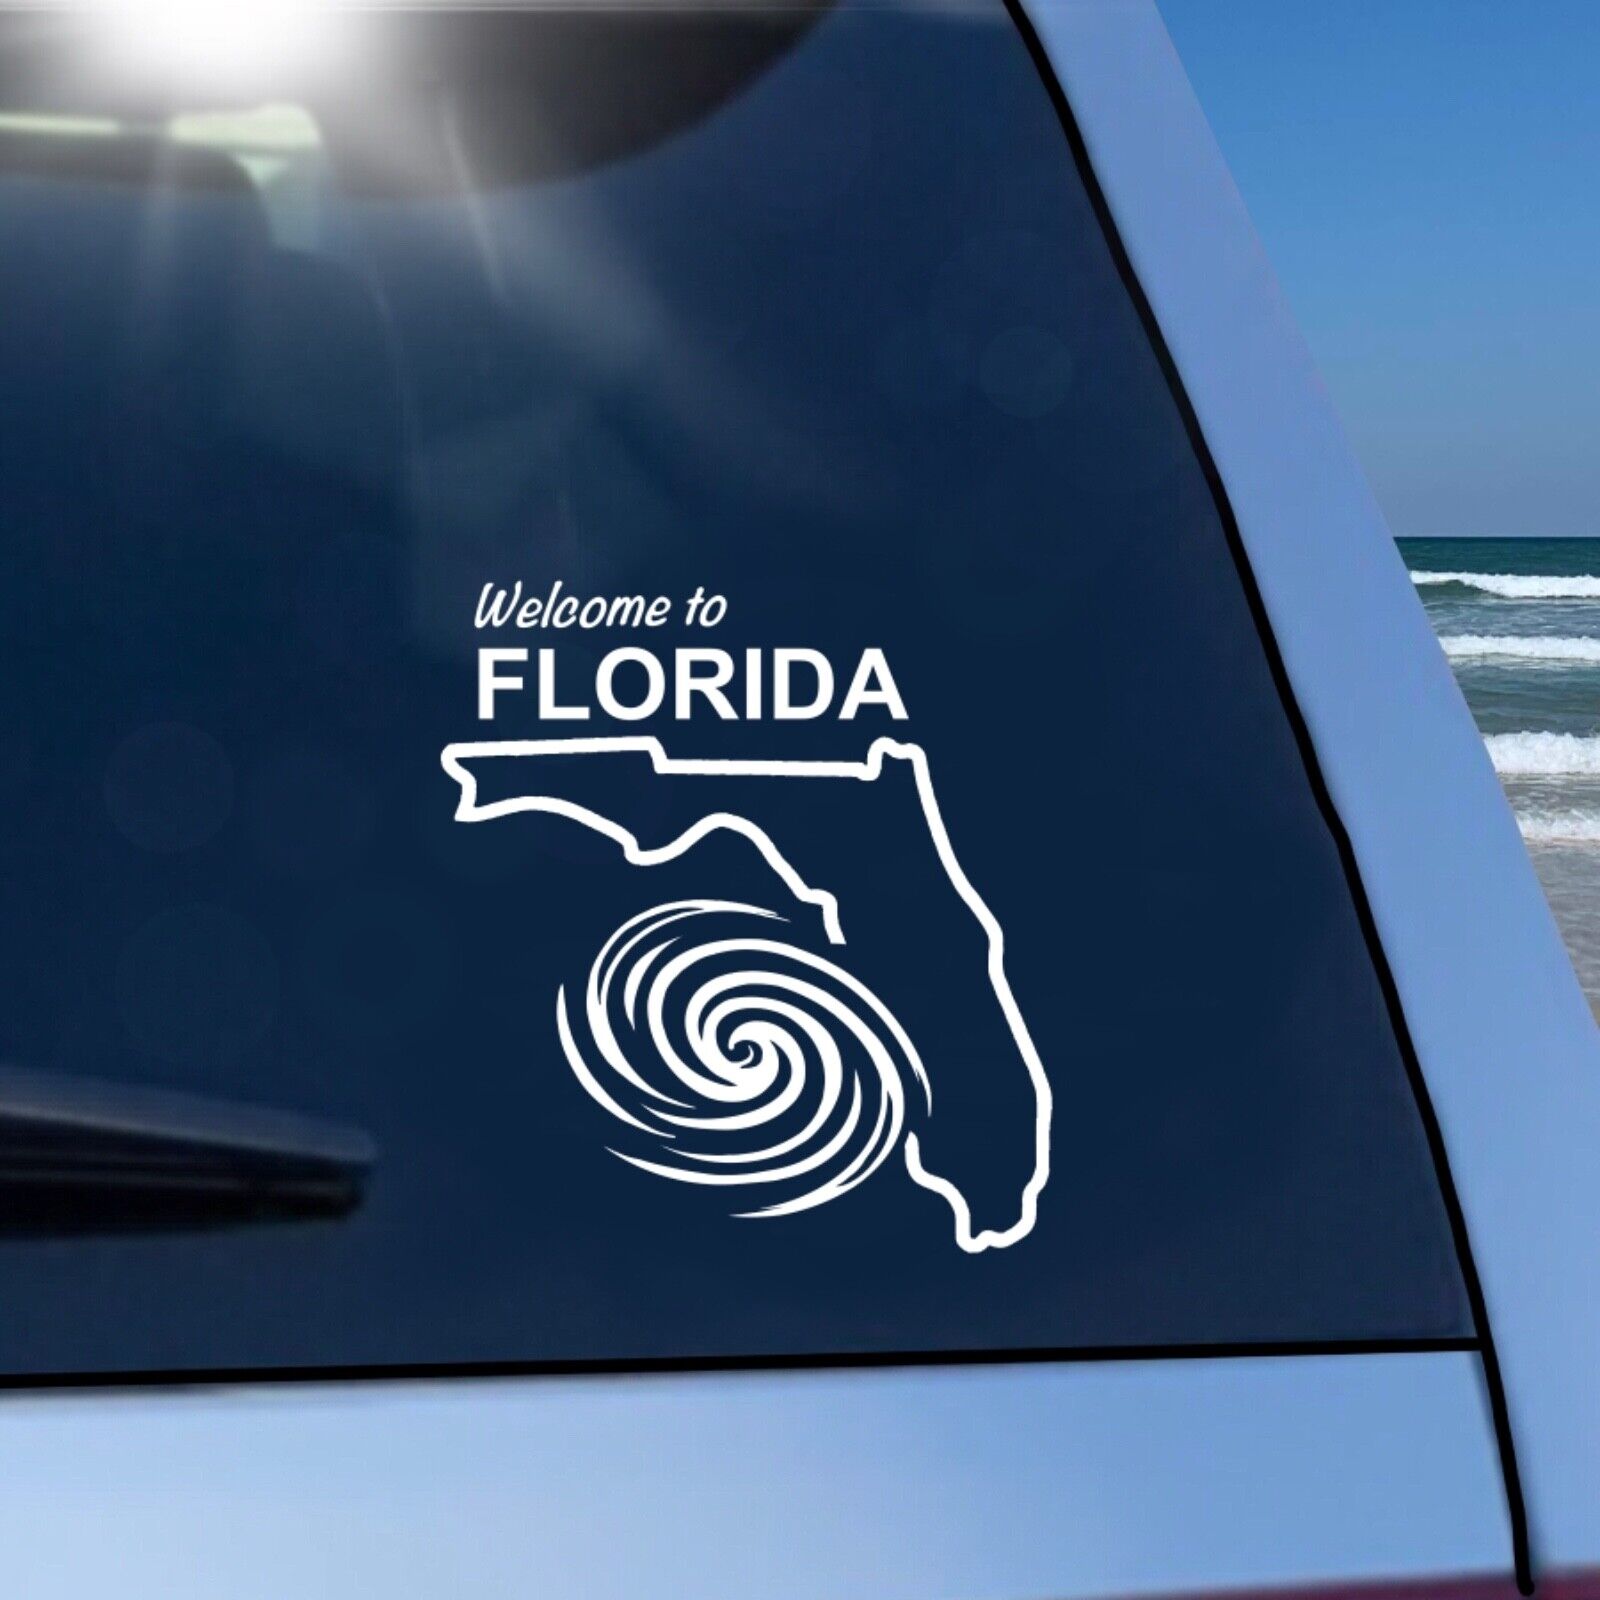 Hurricane Ian Welcome to Florida Decal Sticker for Car